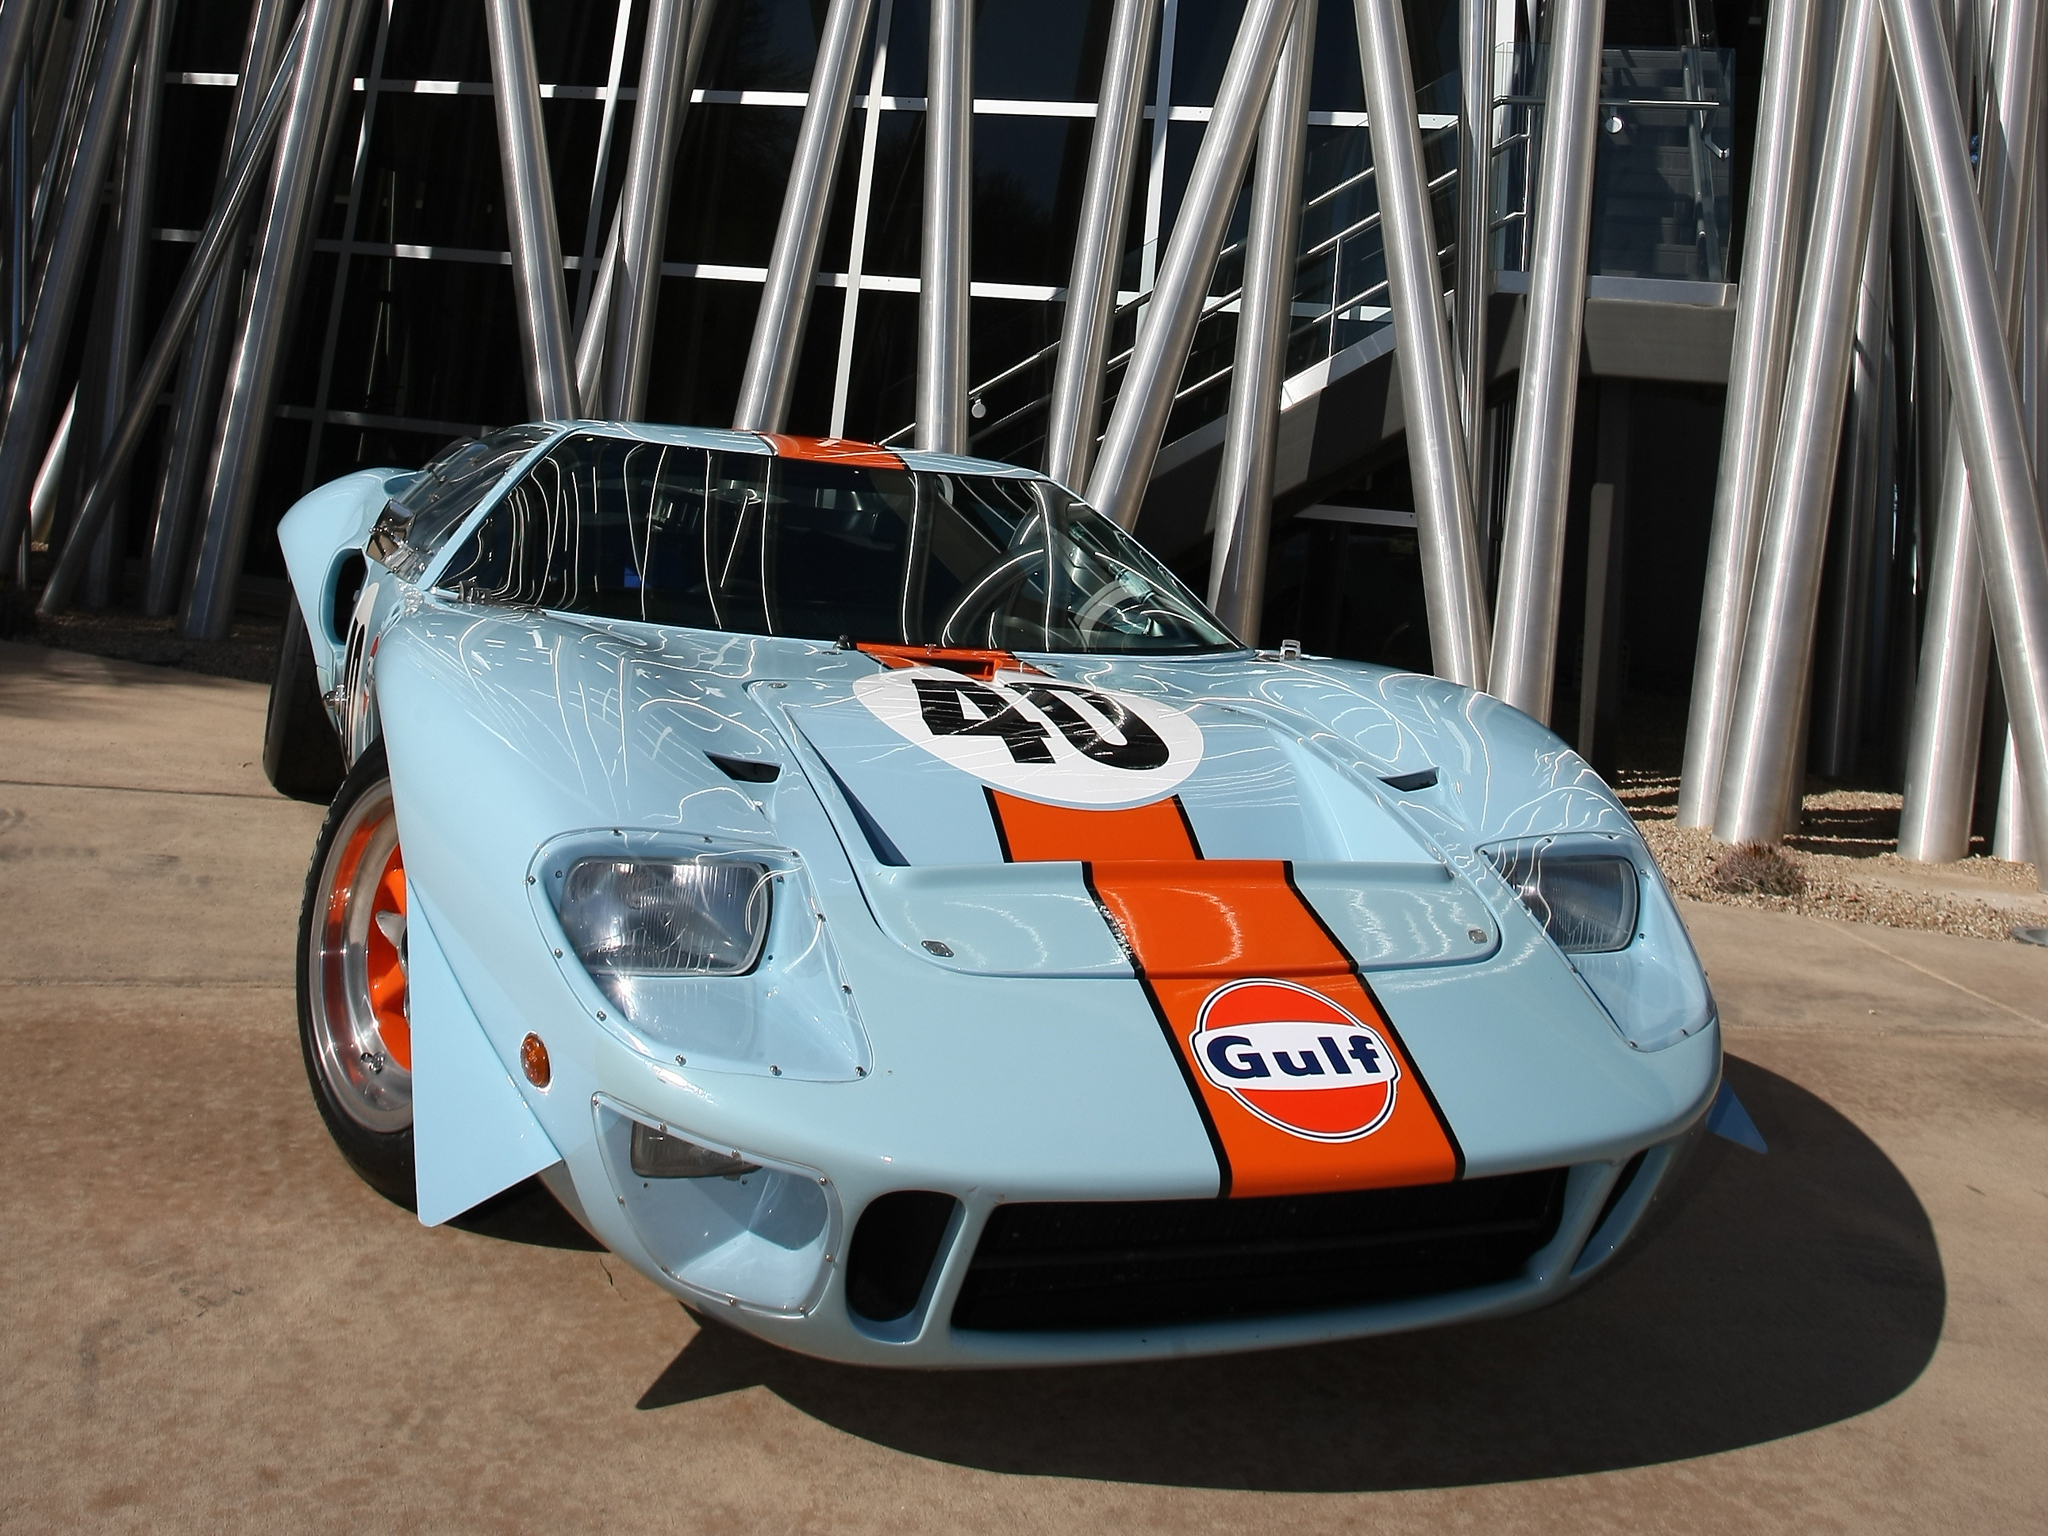 1968, Ford, Gt40, Gulf oil, Le mans, Race, Racing, Supercar, Classic, Ur Wallpaper